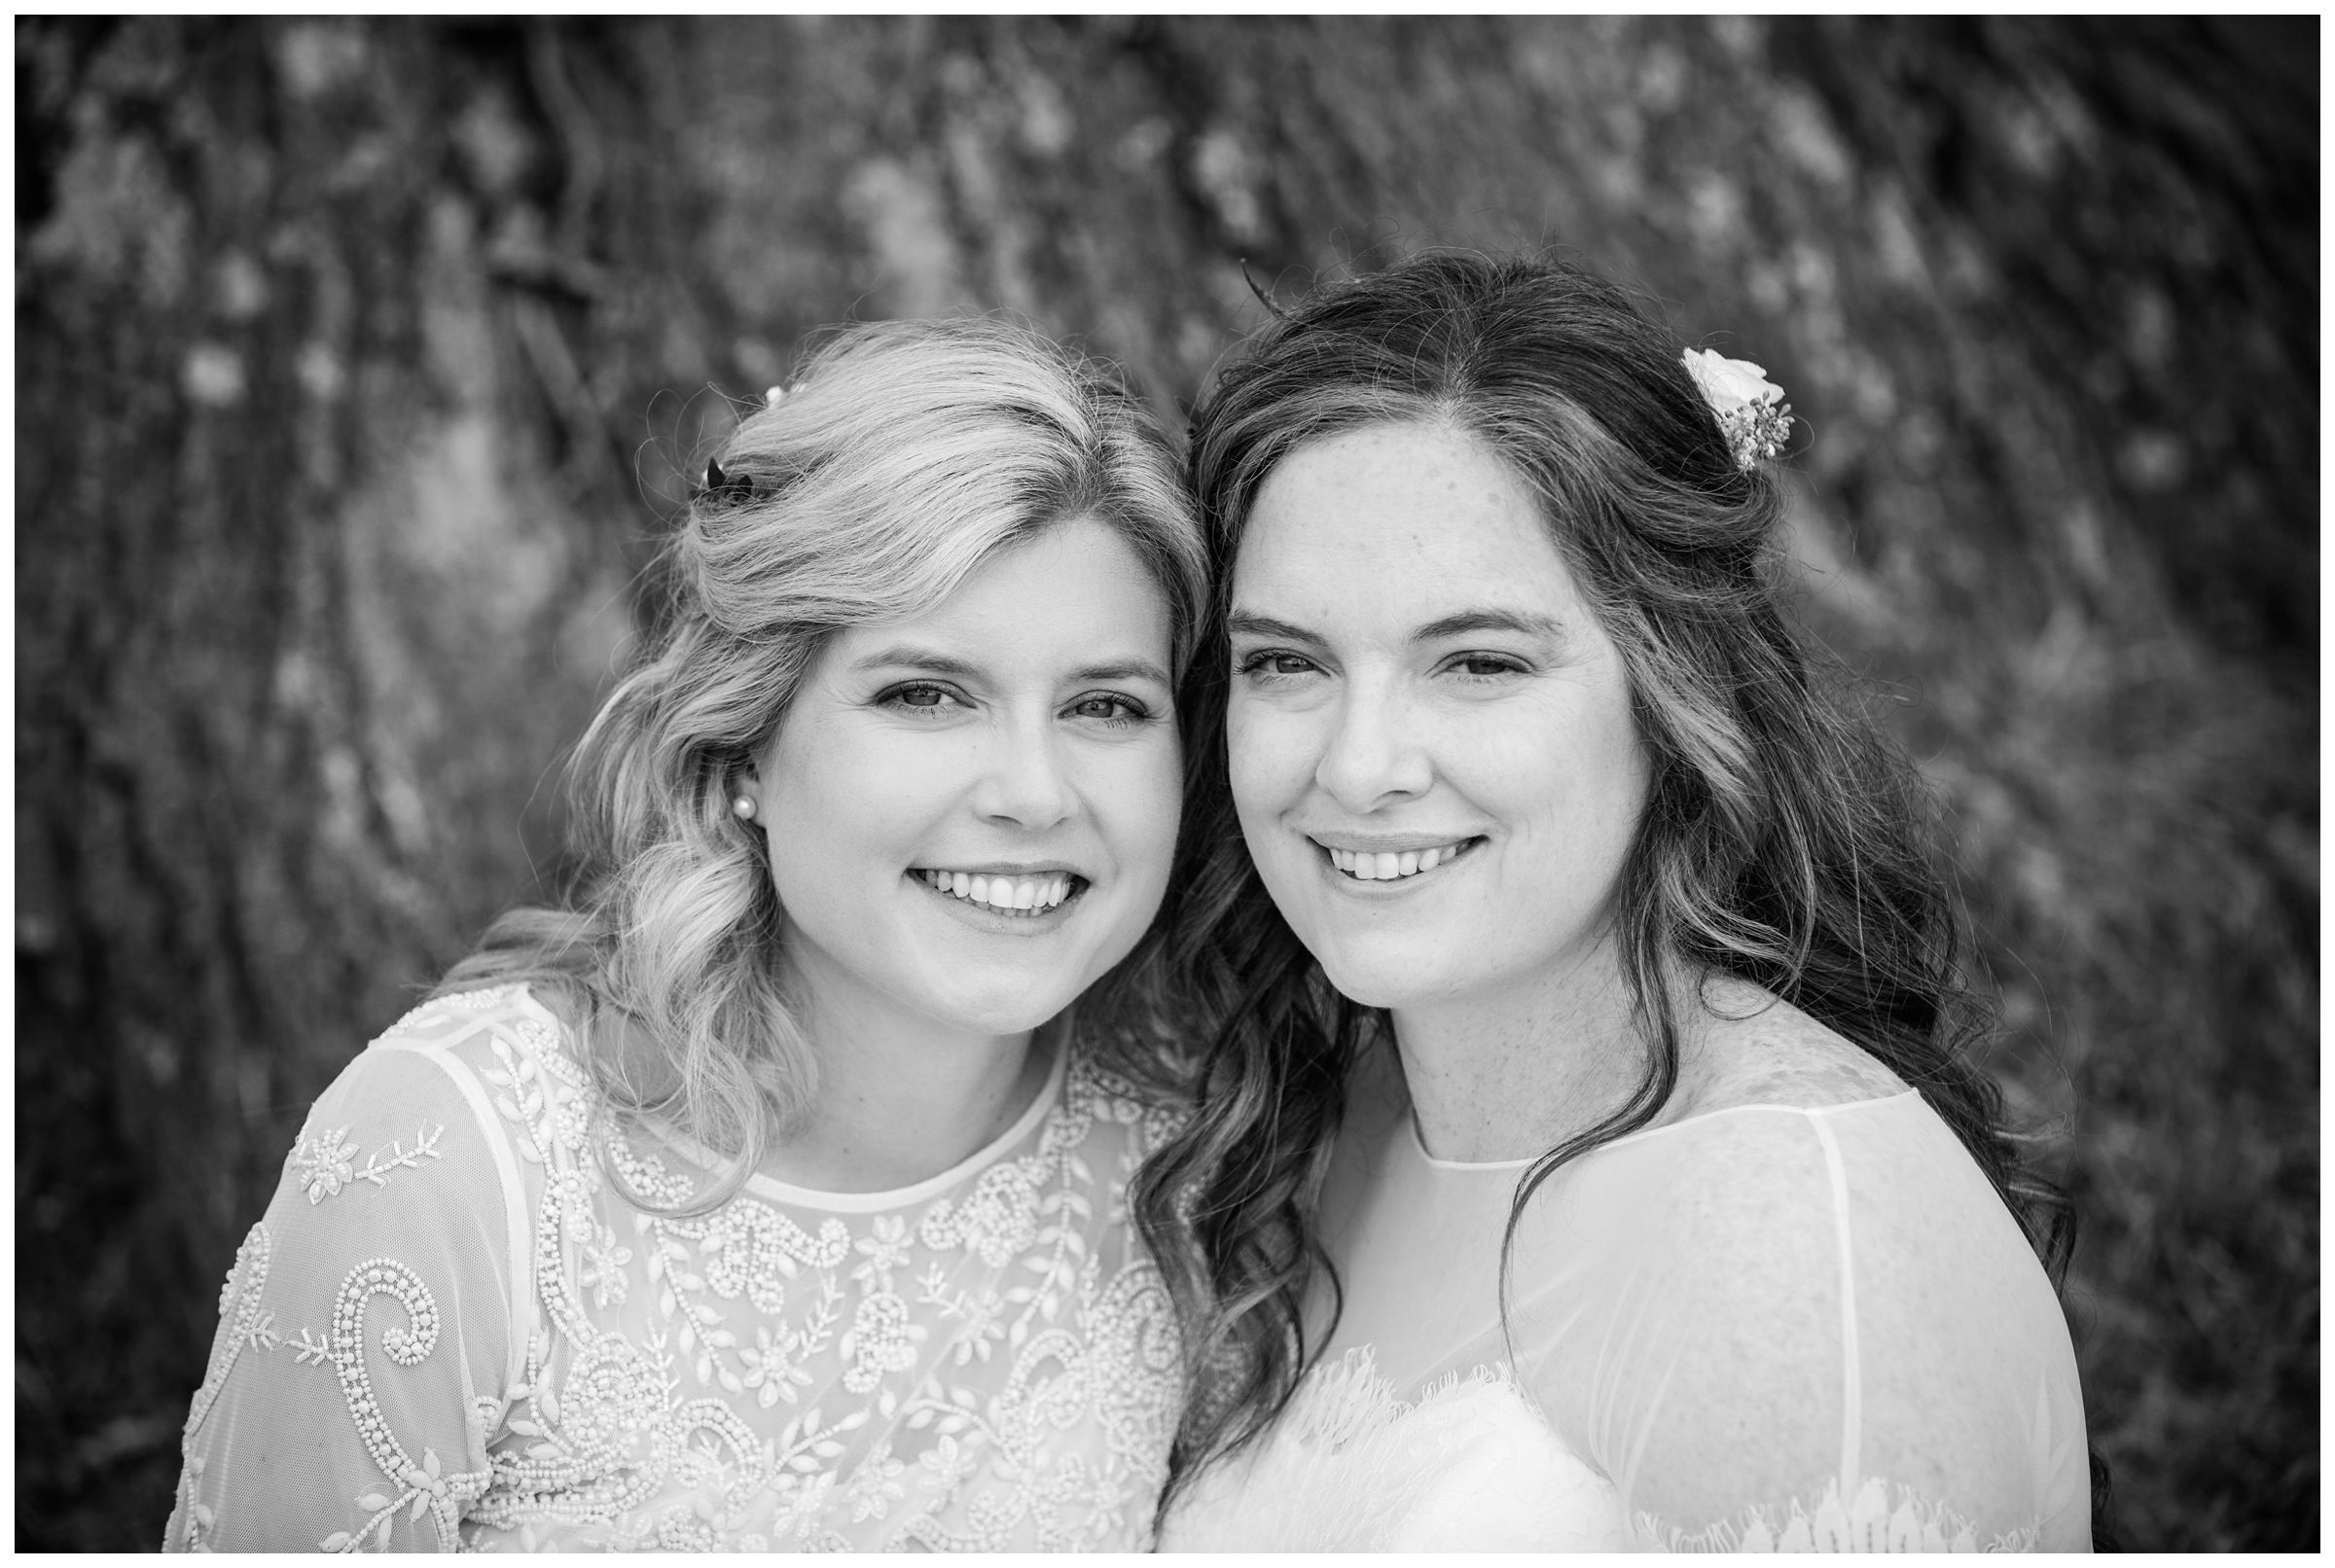 Portrait of two brides on wedding day.